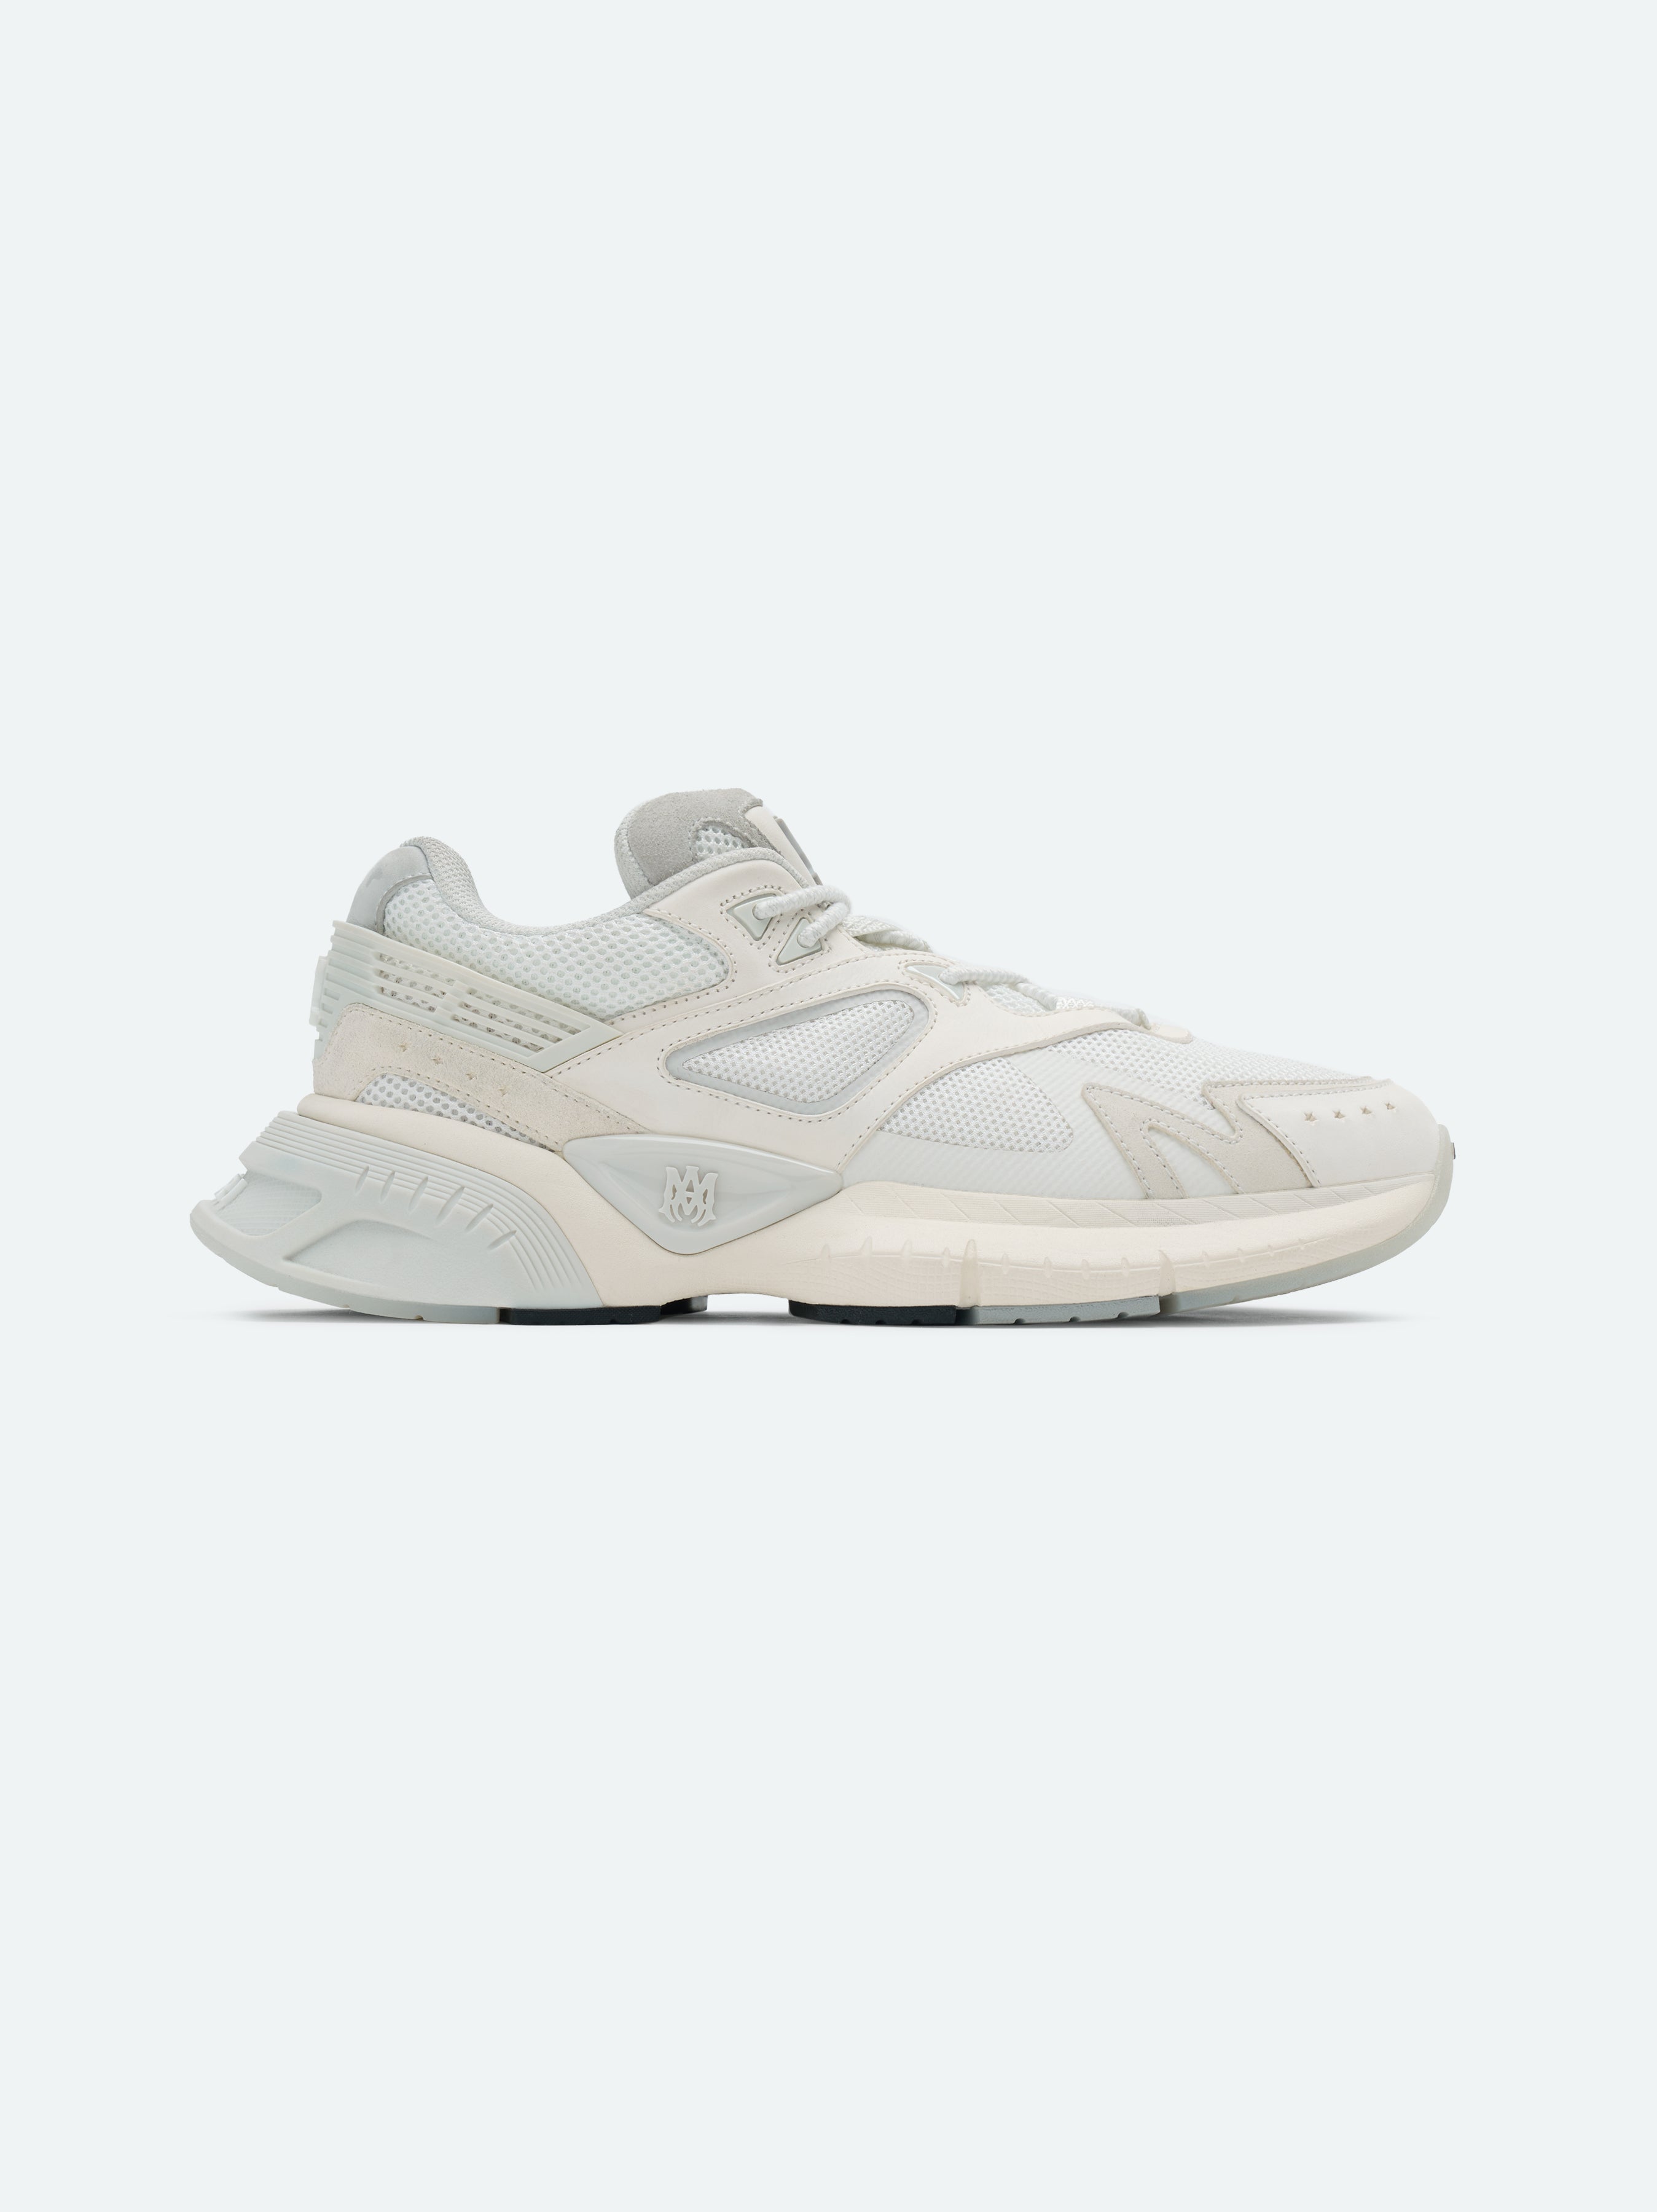 Product MA RUNNER - White featured image